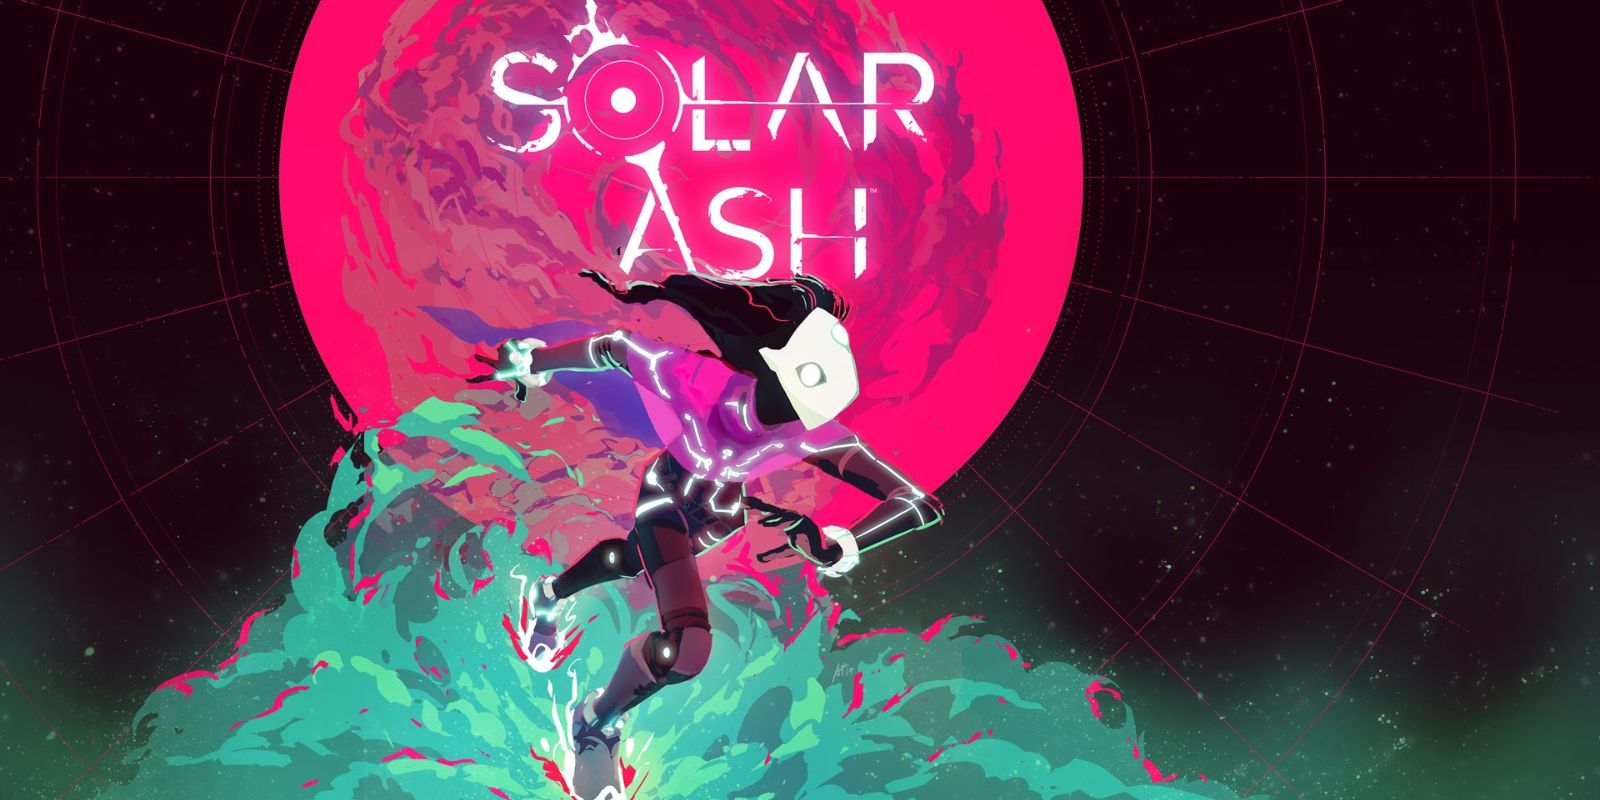 Key art for the indie game Solar Ash